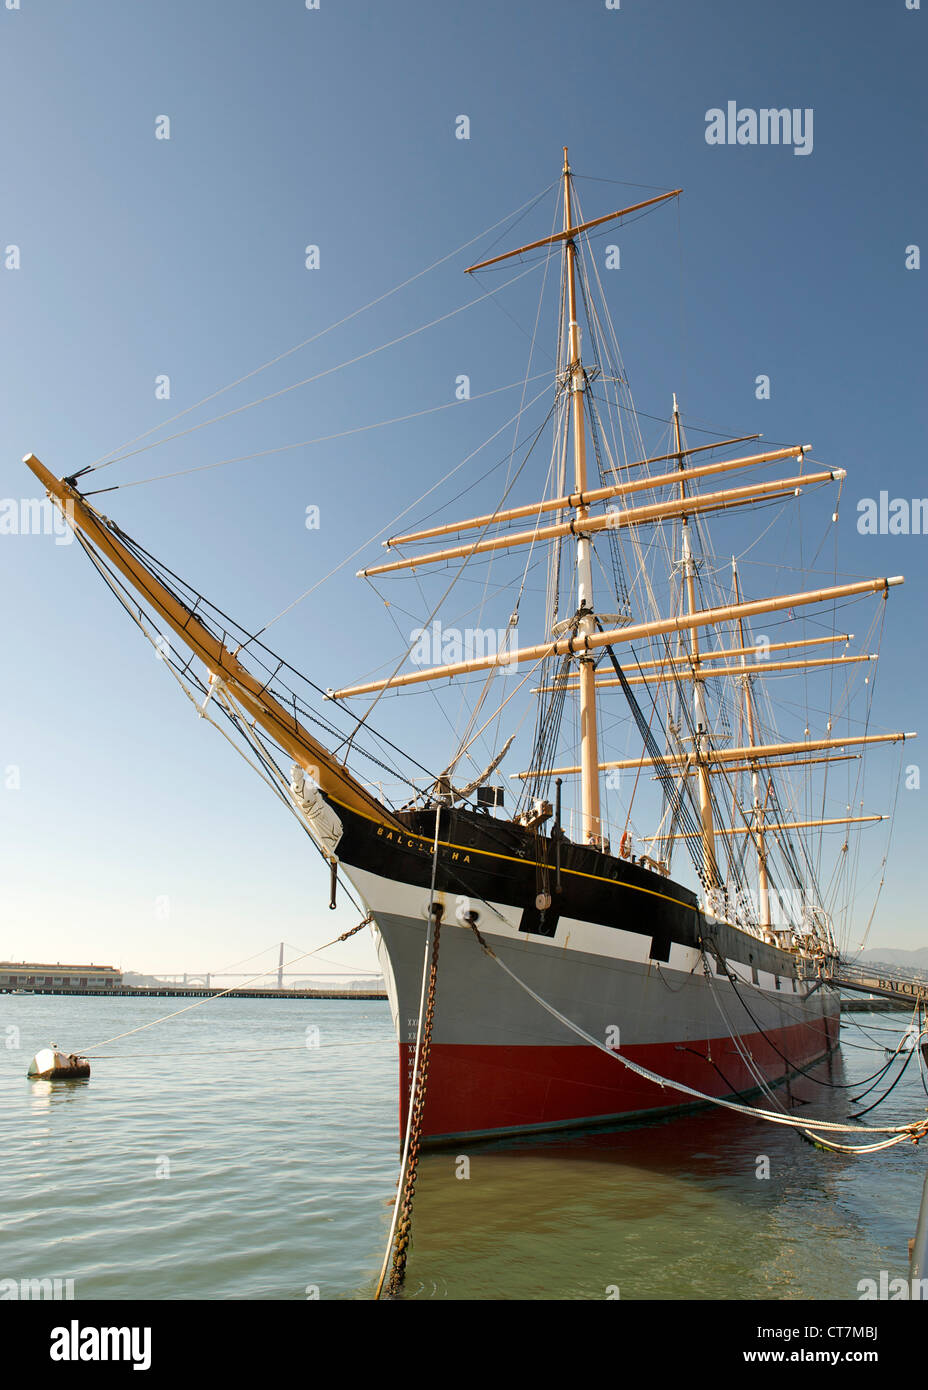 The Balclutha ship moored at the Hyde Street Pier in the Fisherman's Wharf waterfront area of San Francisco, California, USA. Stock Photo